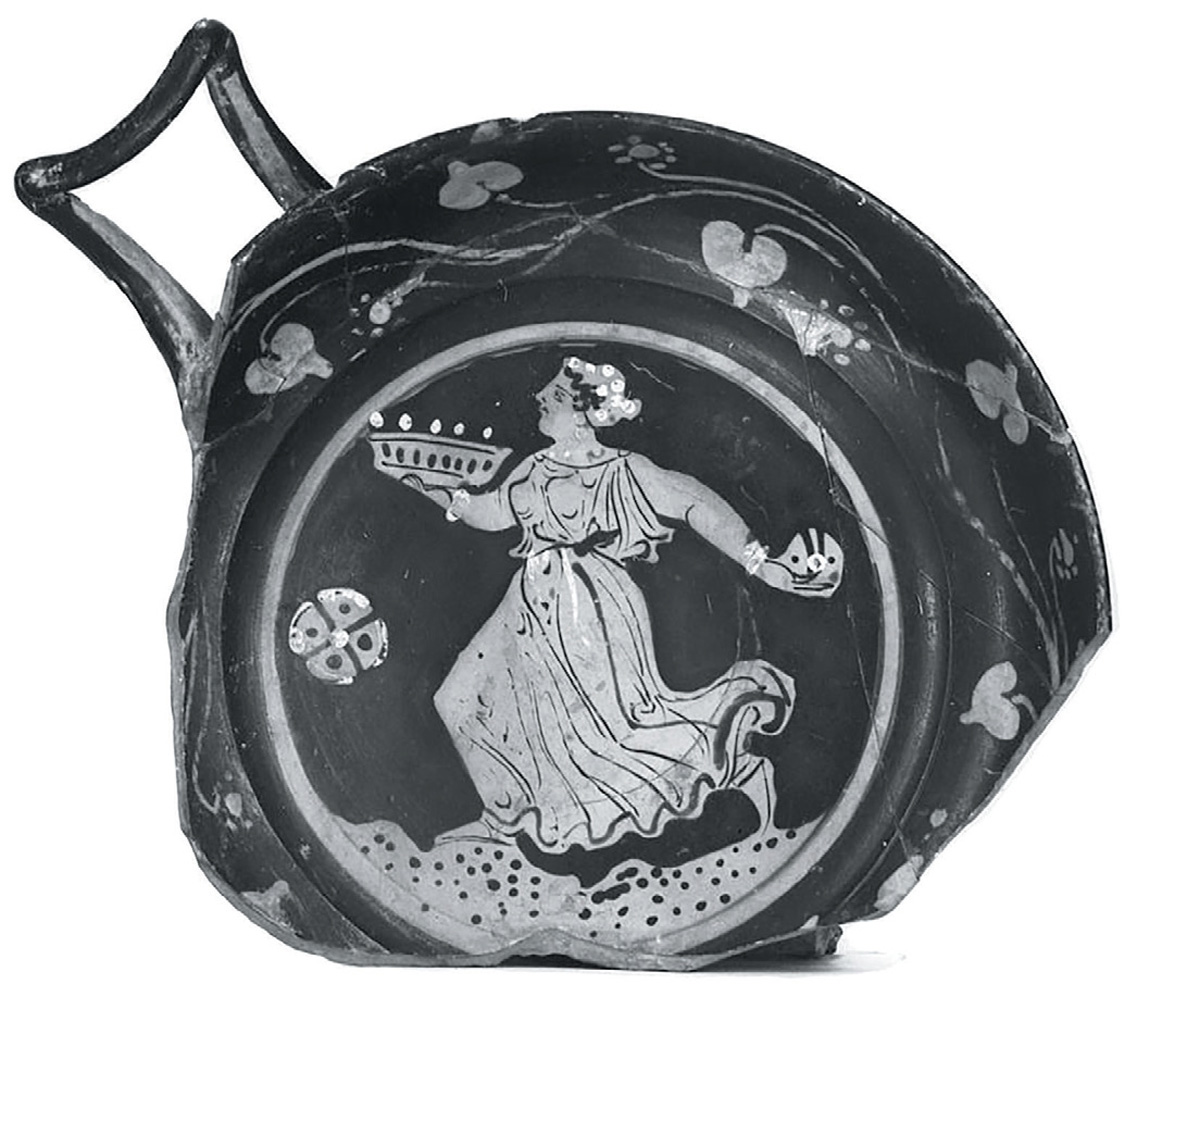 This Hellenistic kylix (drinking cup) dates back to 350-300 B.C.E., with an image perhaps depicting an amphiphon, or other offering cake, lit with candles. Courtesy of the Ure Museum of Greek Archeology. Accession number 22.3.24